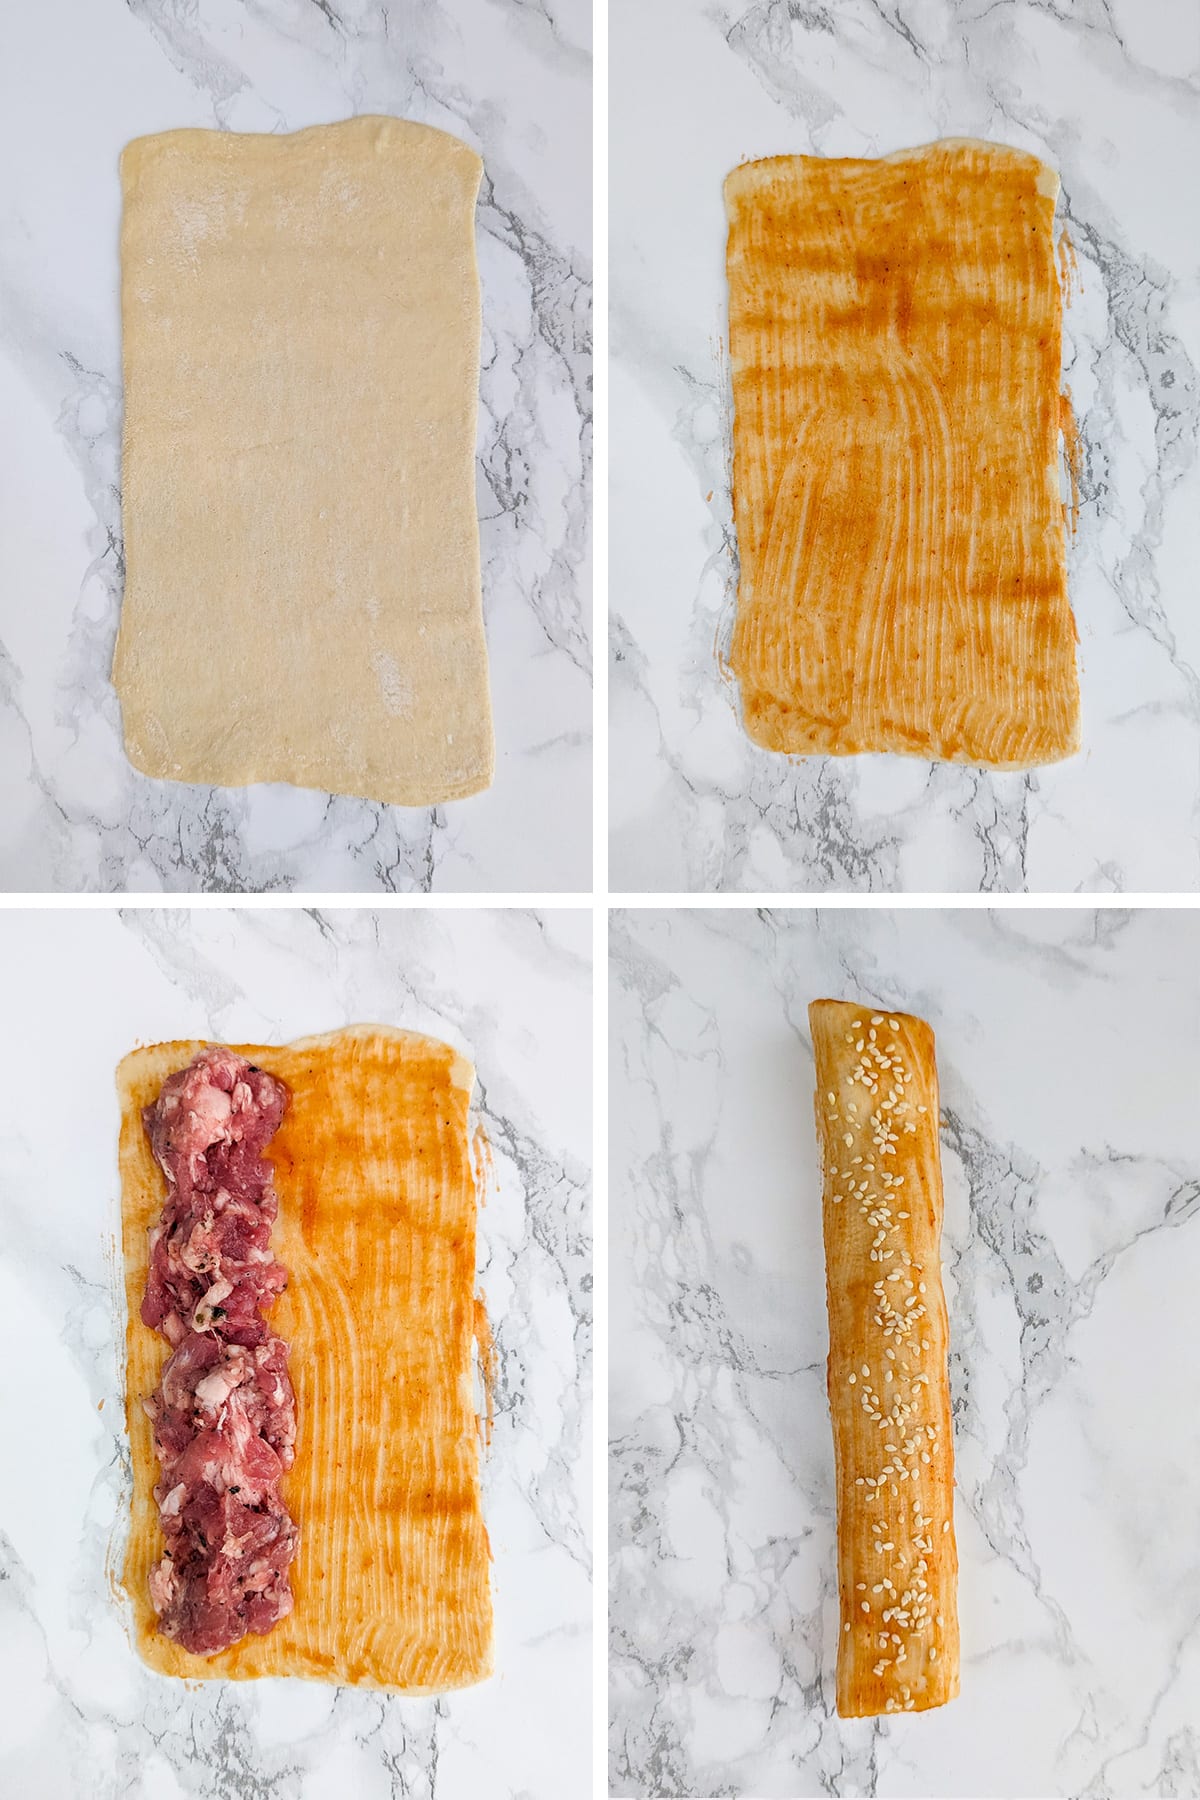 Step-by-step how to make homemade sausage rolls at home.